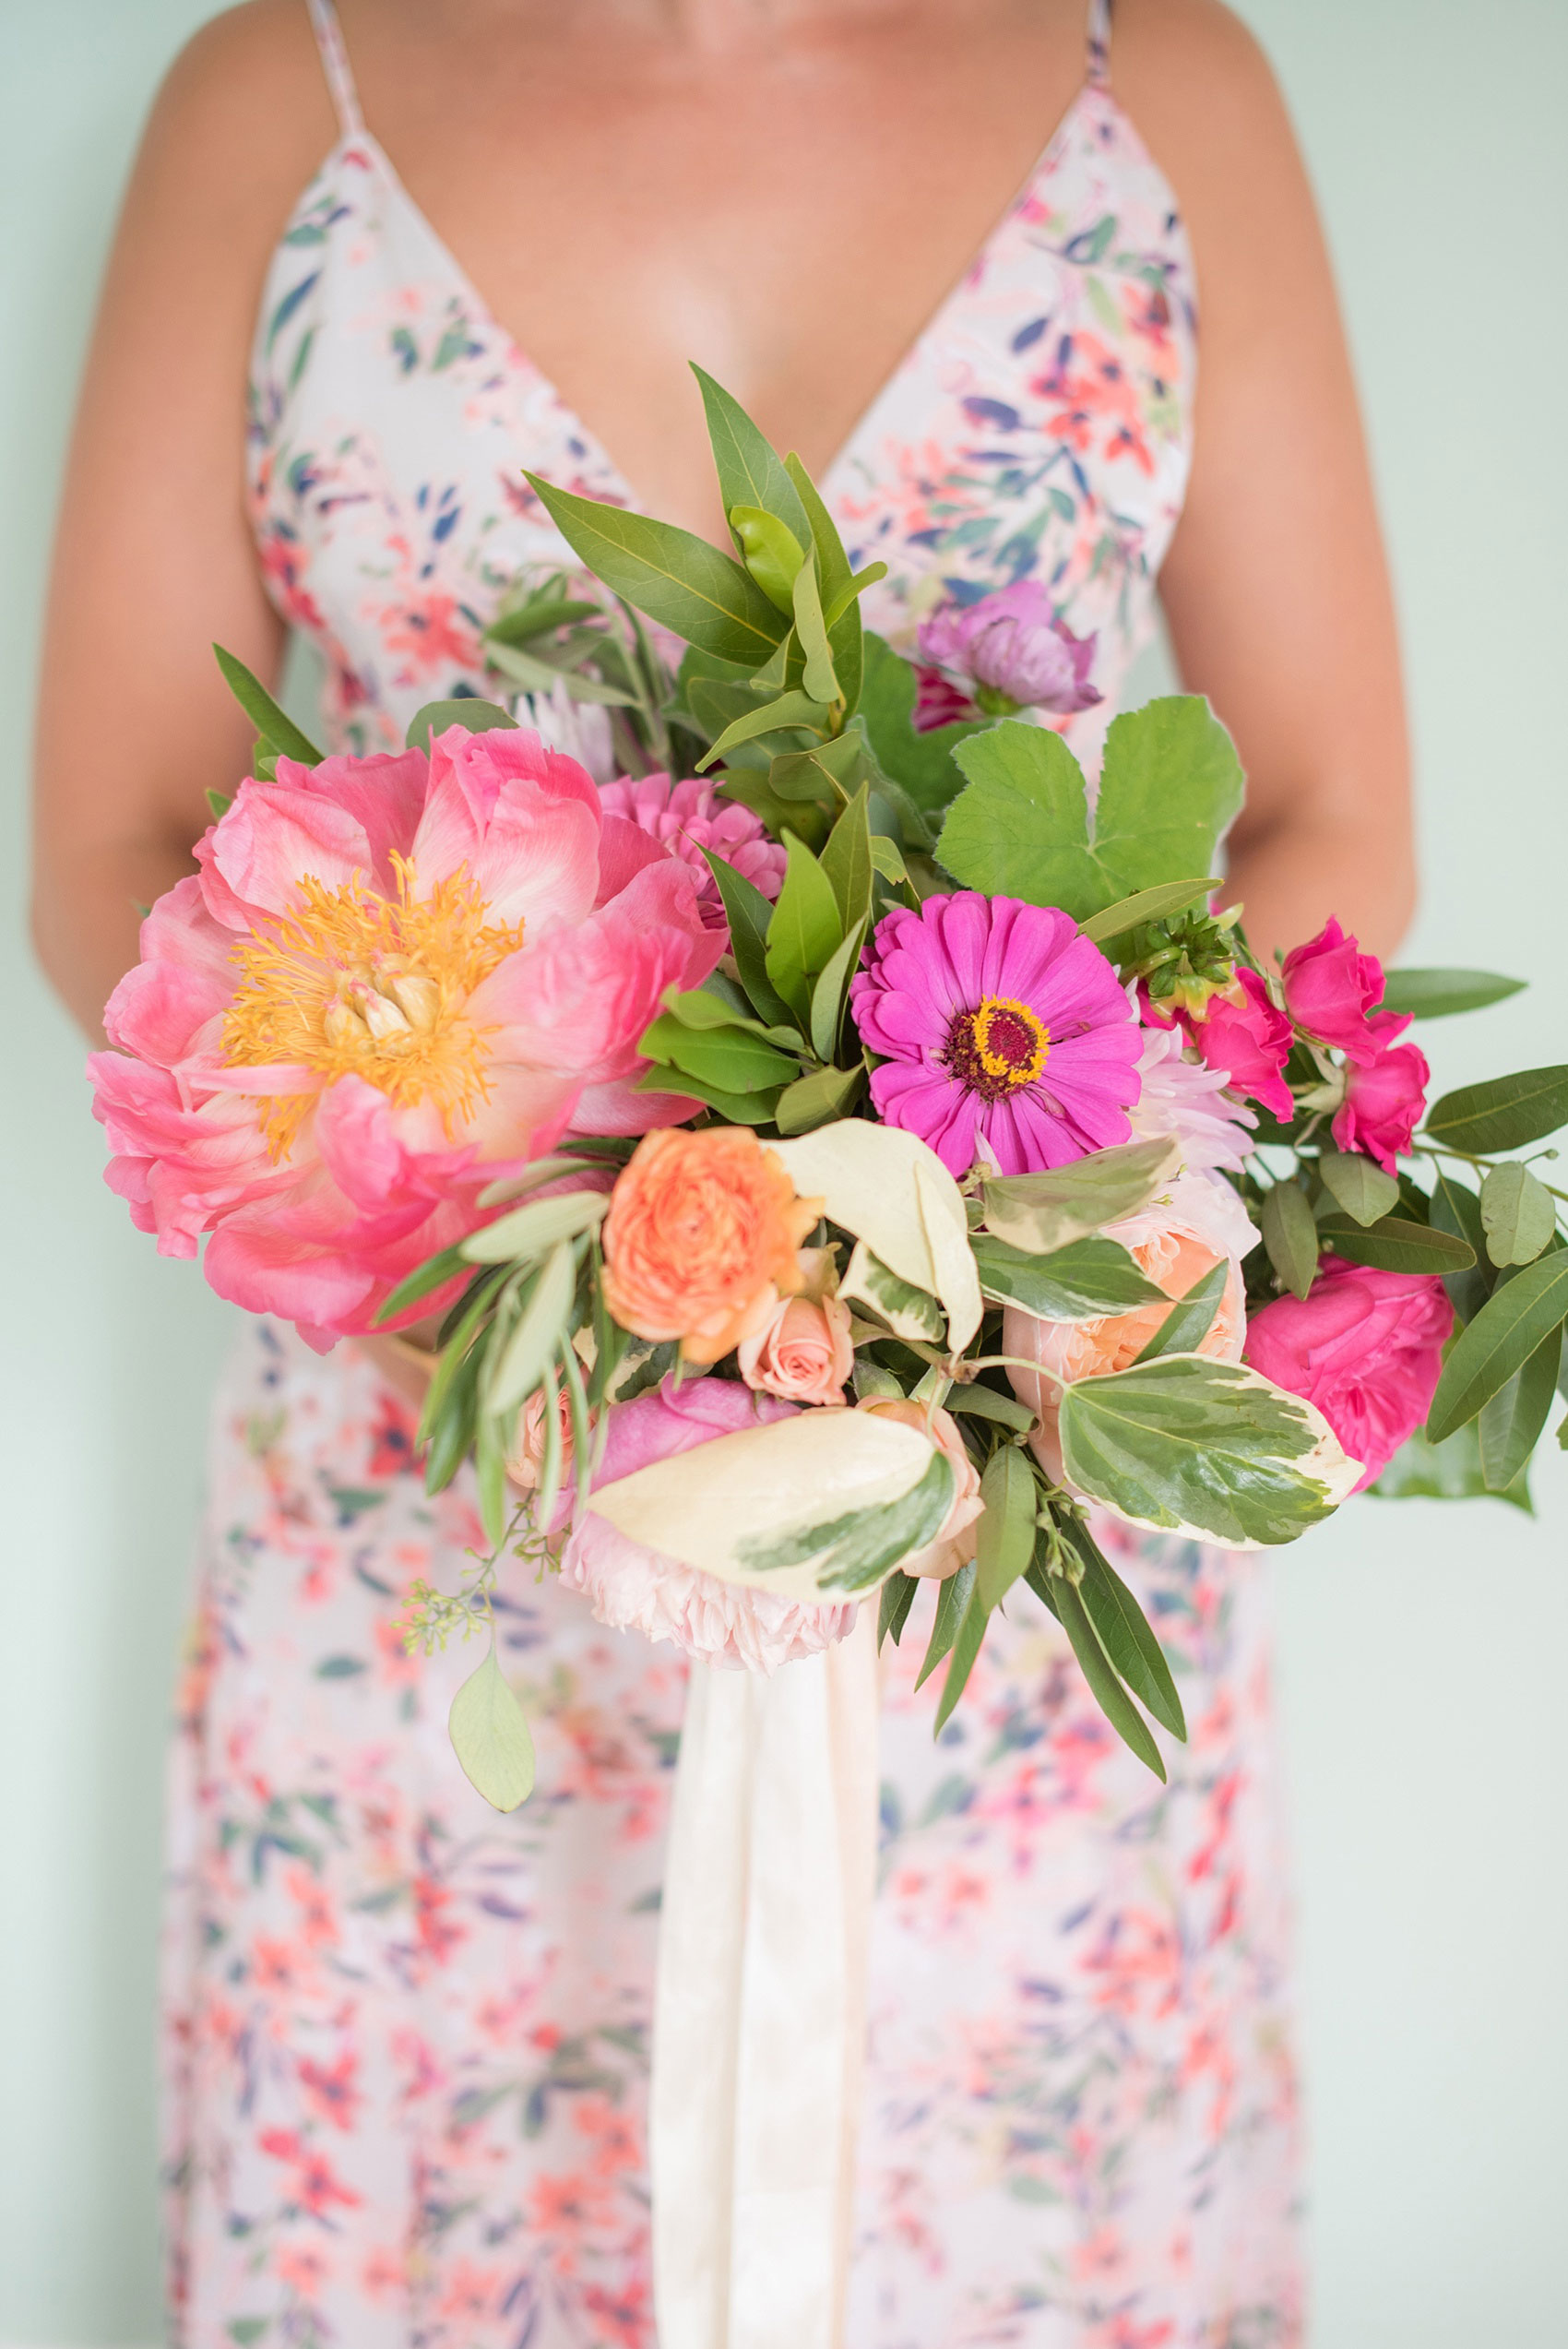 Mikkel Paige Photography wedding photos at The Merrimon-Wynne House in downtown Raleigh. Bridesmaids in floral maxi gowns with colorful pink, orange and green bouquets with peonies, eucalyptus and garden roses by Meristem Floral. 